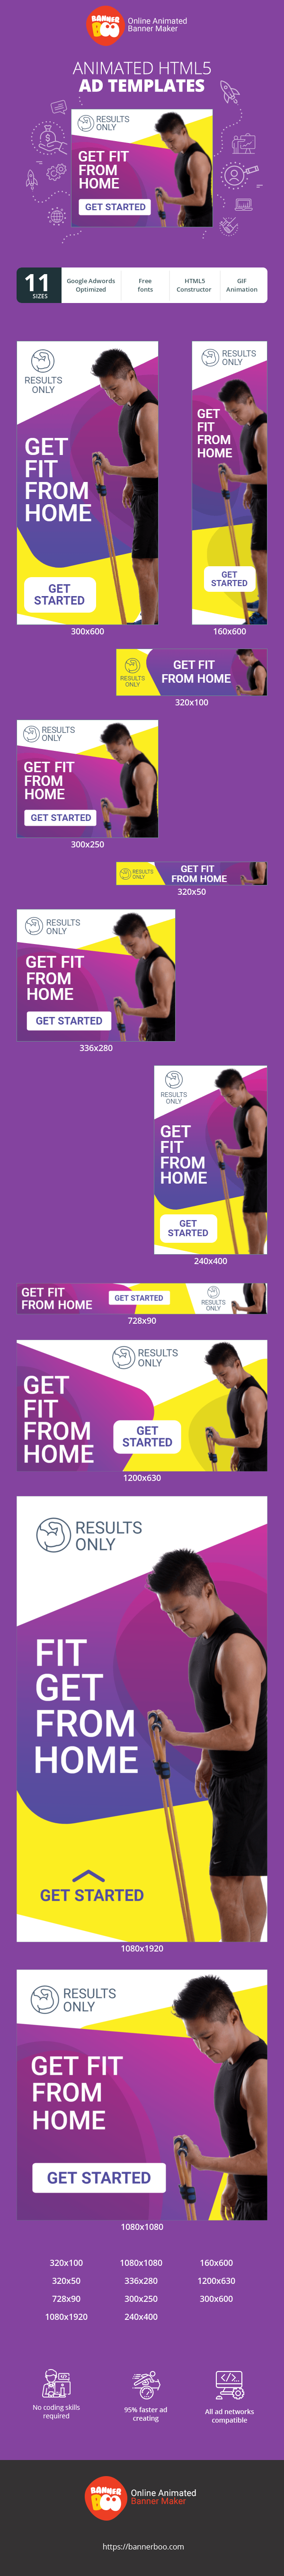 Szablon reklamy banerowej — Get Fit From Home — Get Started